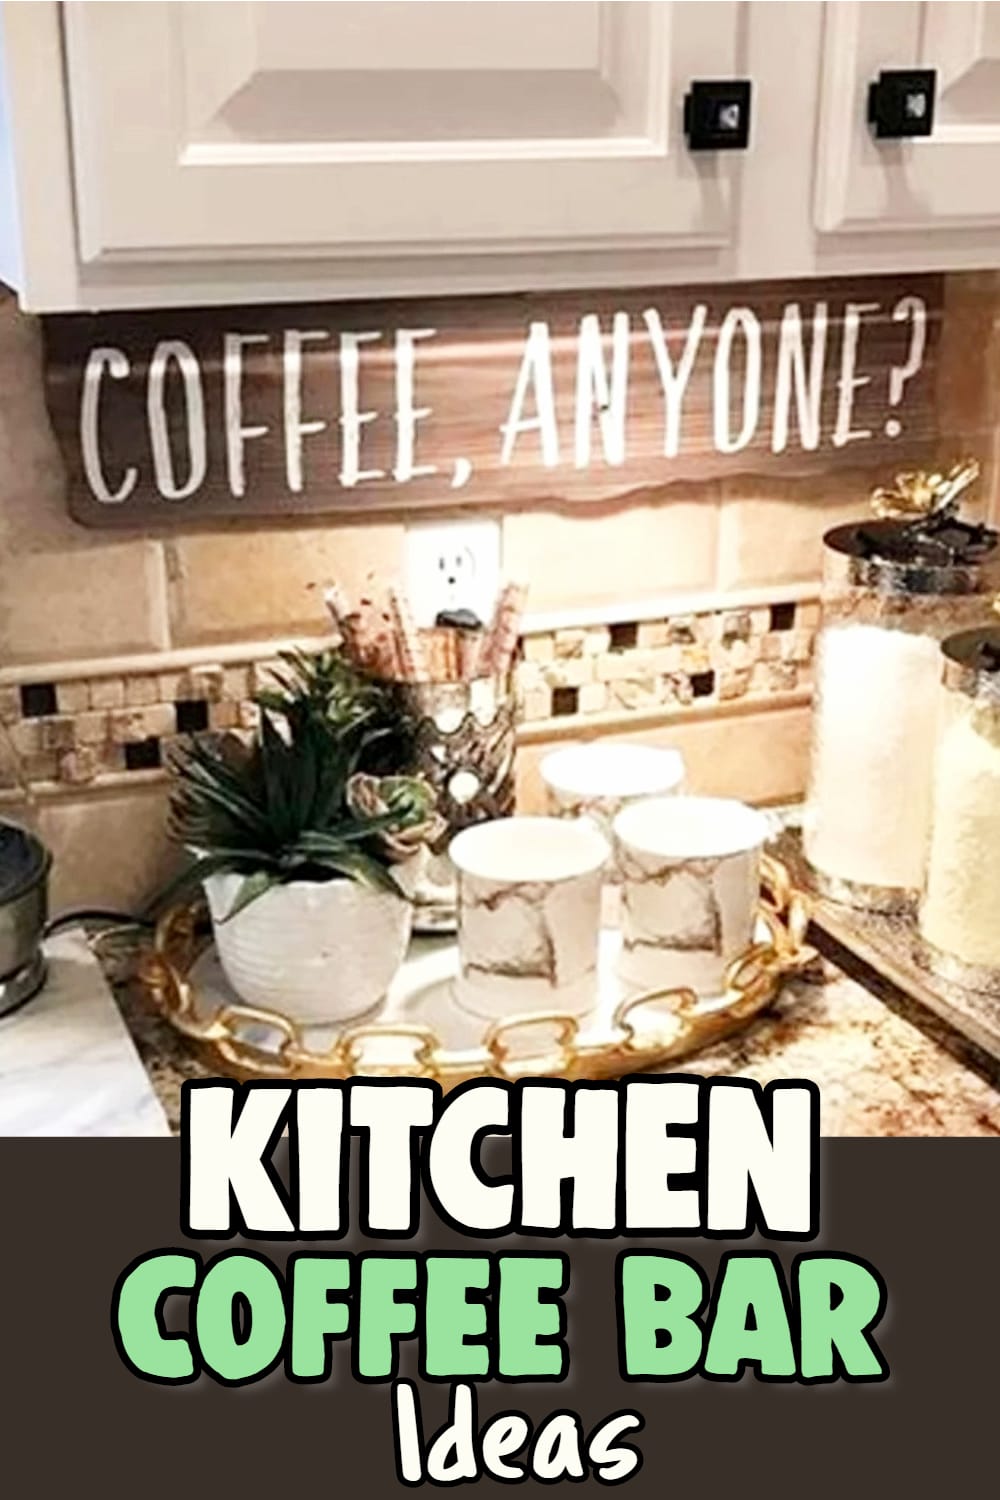 Kitchen Coffee Bar Ideas!  Coffee bar ideas for kitchen counter a coffee area in your kitchen and coffee nook ideas - love ALL these kitchen coffee bars!